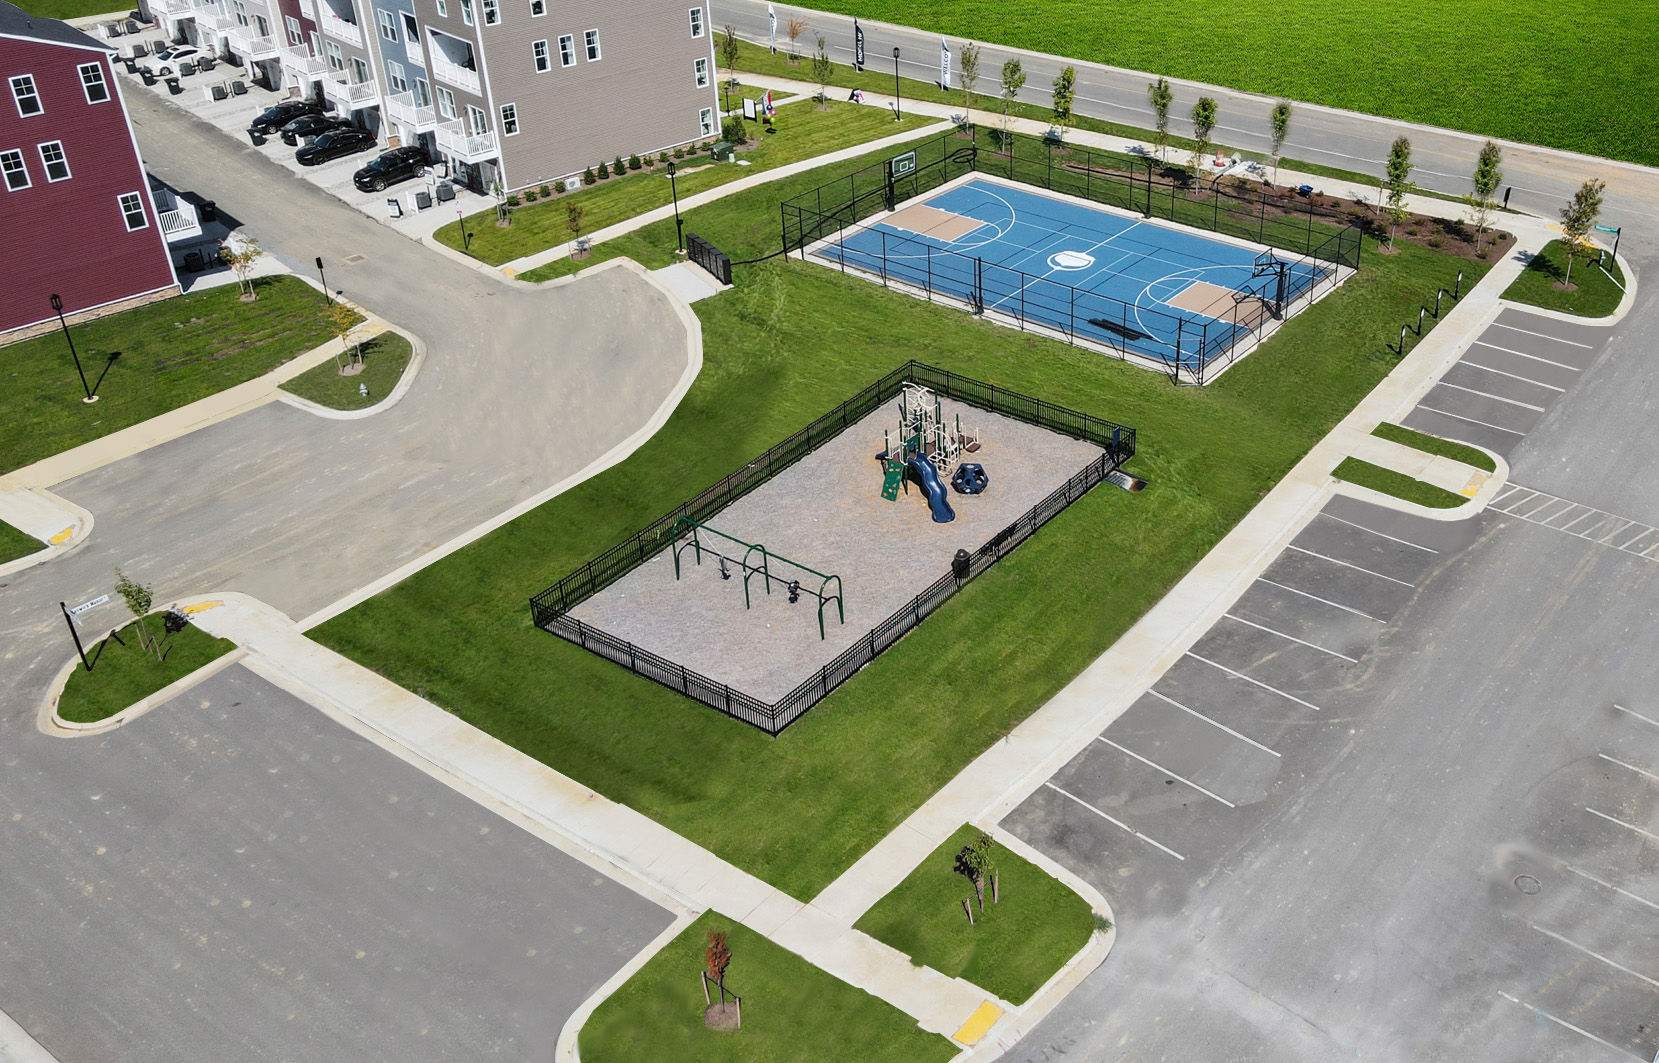 Aerial view of sports court and playground amenity